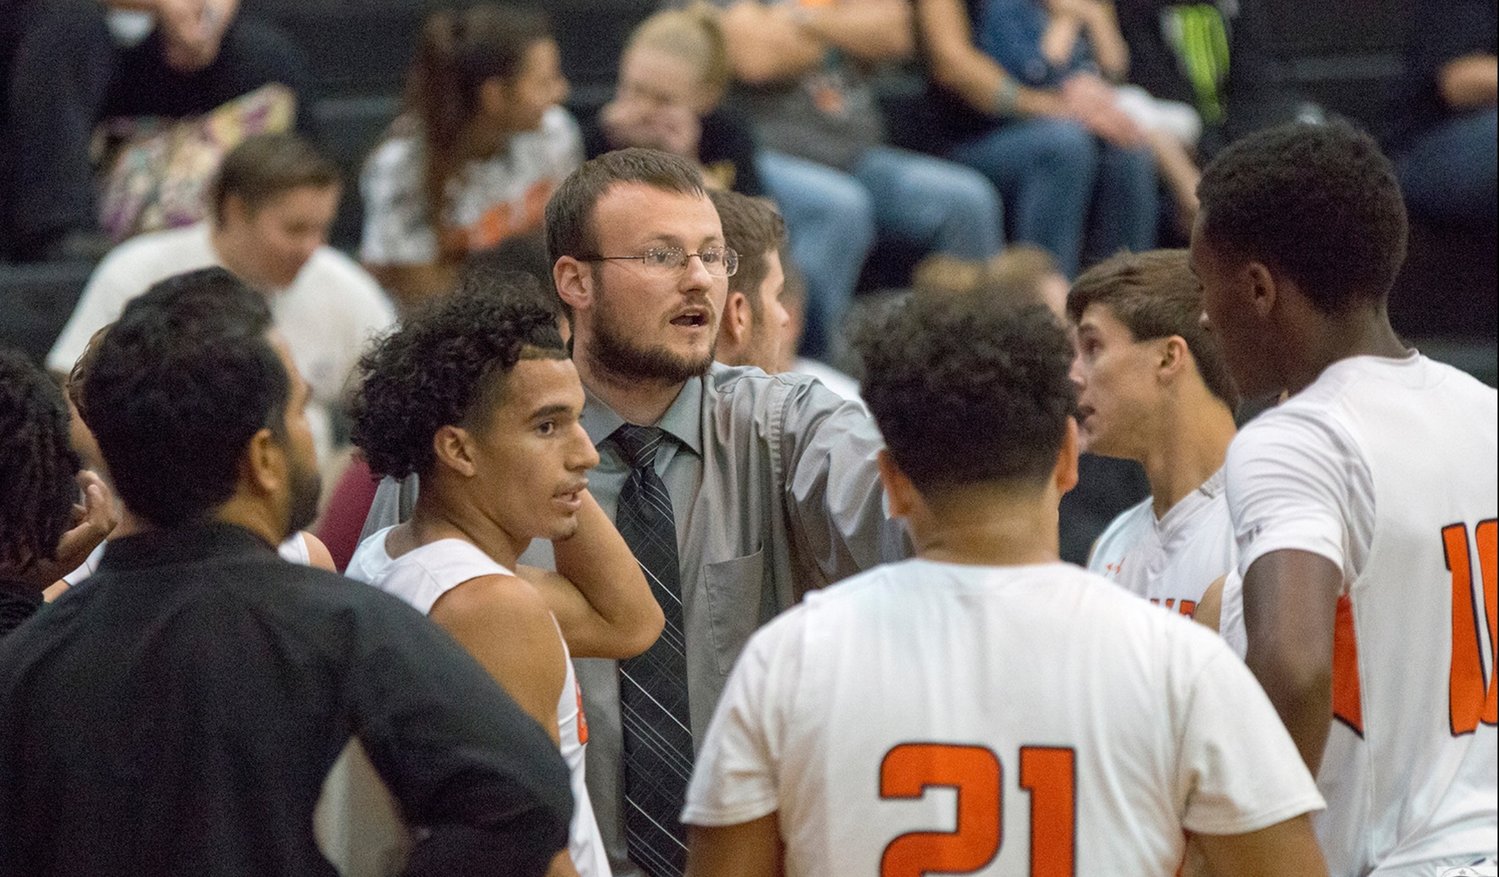 Head coach A.J. Irwin decided to move on from his position at Gonzales to Burnett, where he'll be able to learn under a new head coach and become a much better educator and coach.